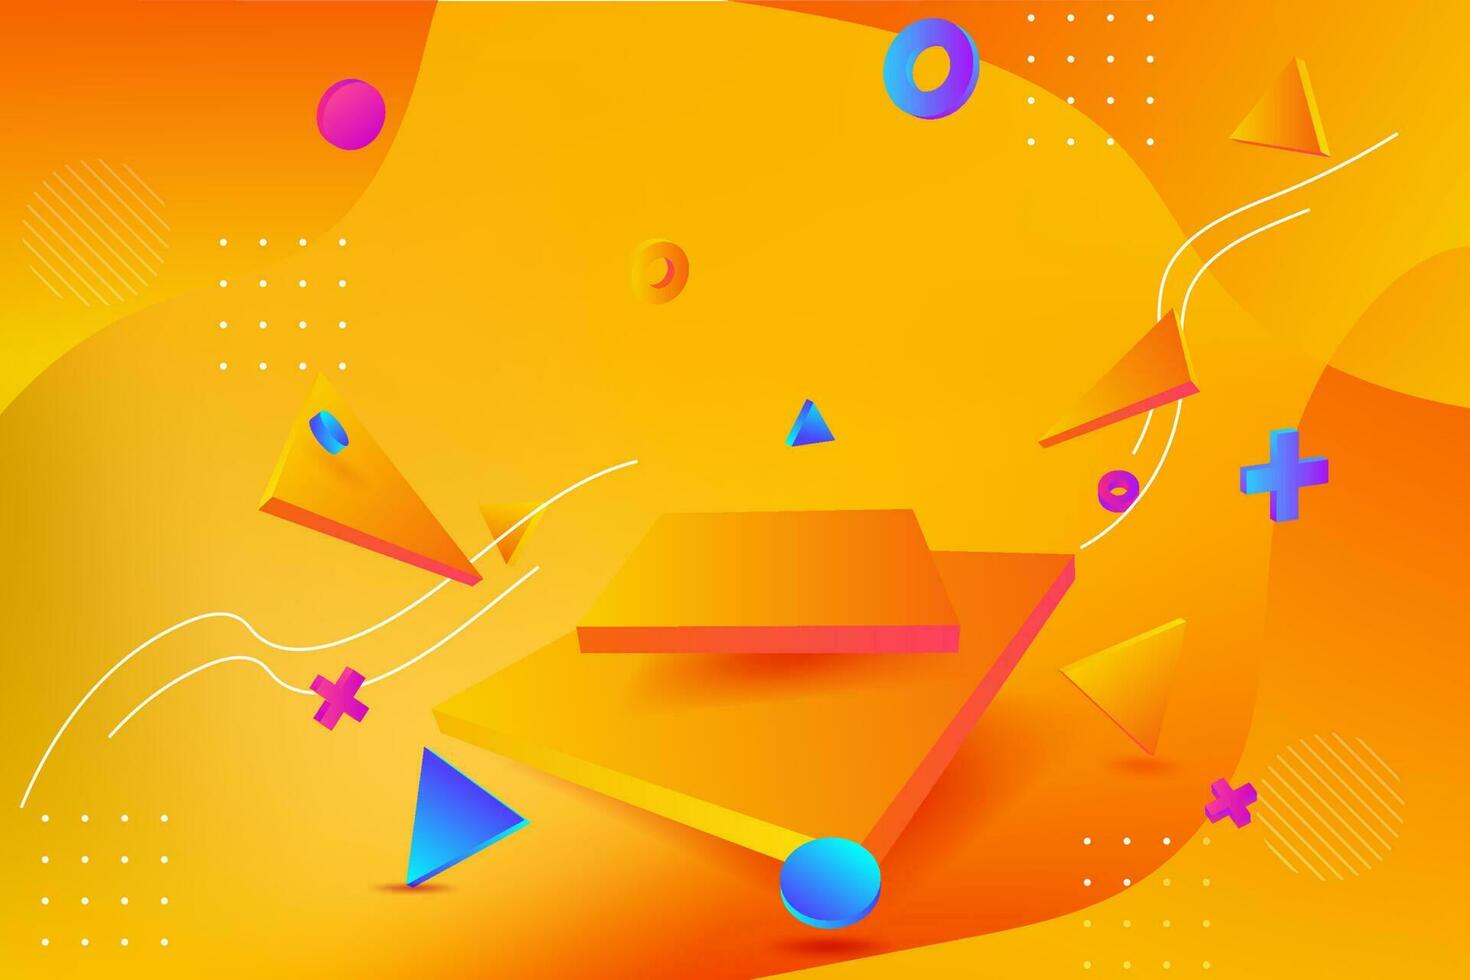 Modern 3D Vector Illustration of a Neon orange Circle Pedestal Platform Scene for Technology Showcase, Vibrant Fluorescent Mockup Template, yellow Glow and Geometric Shapes